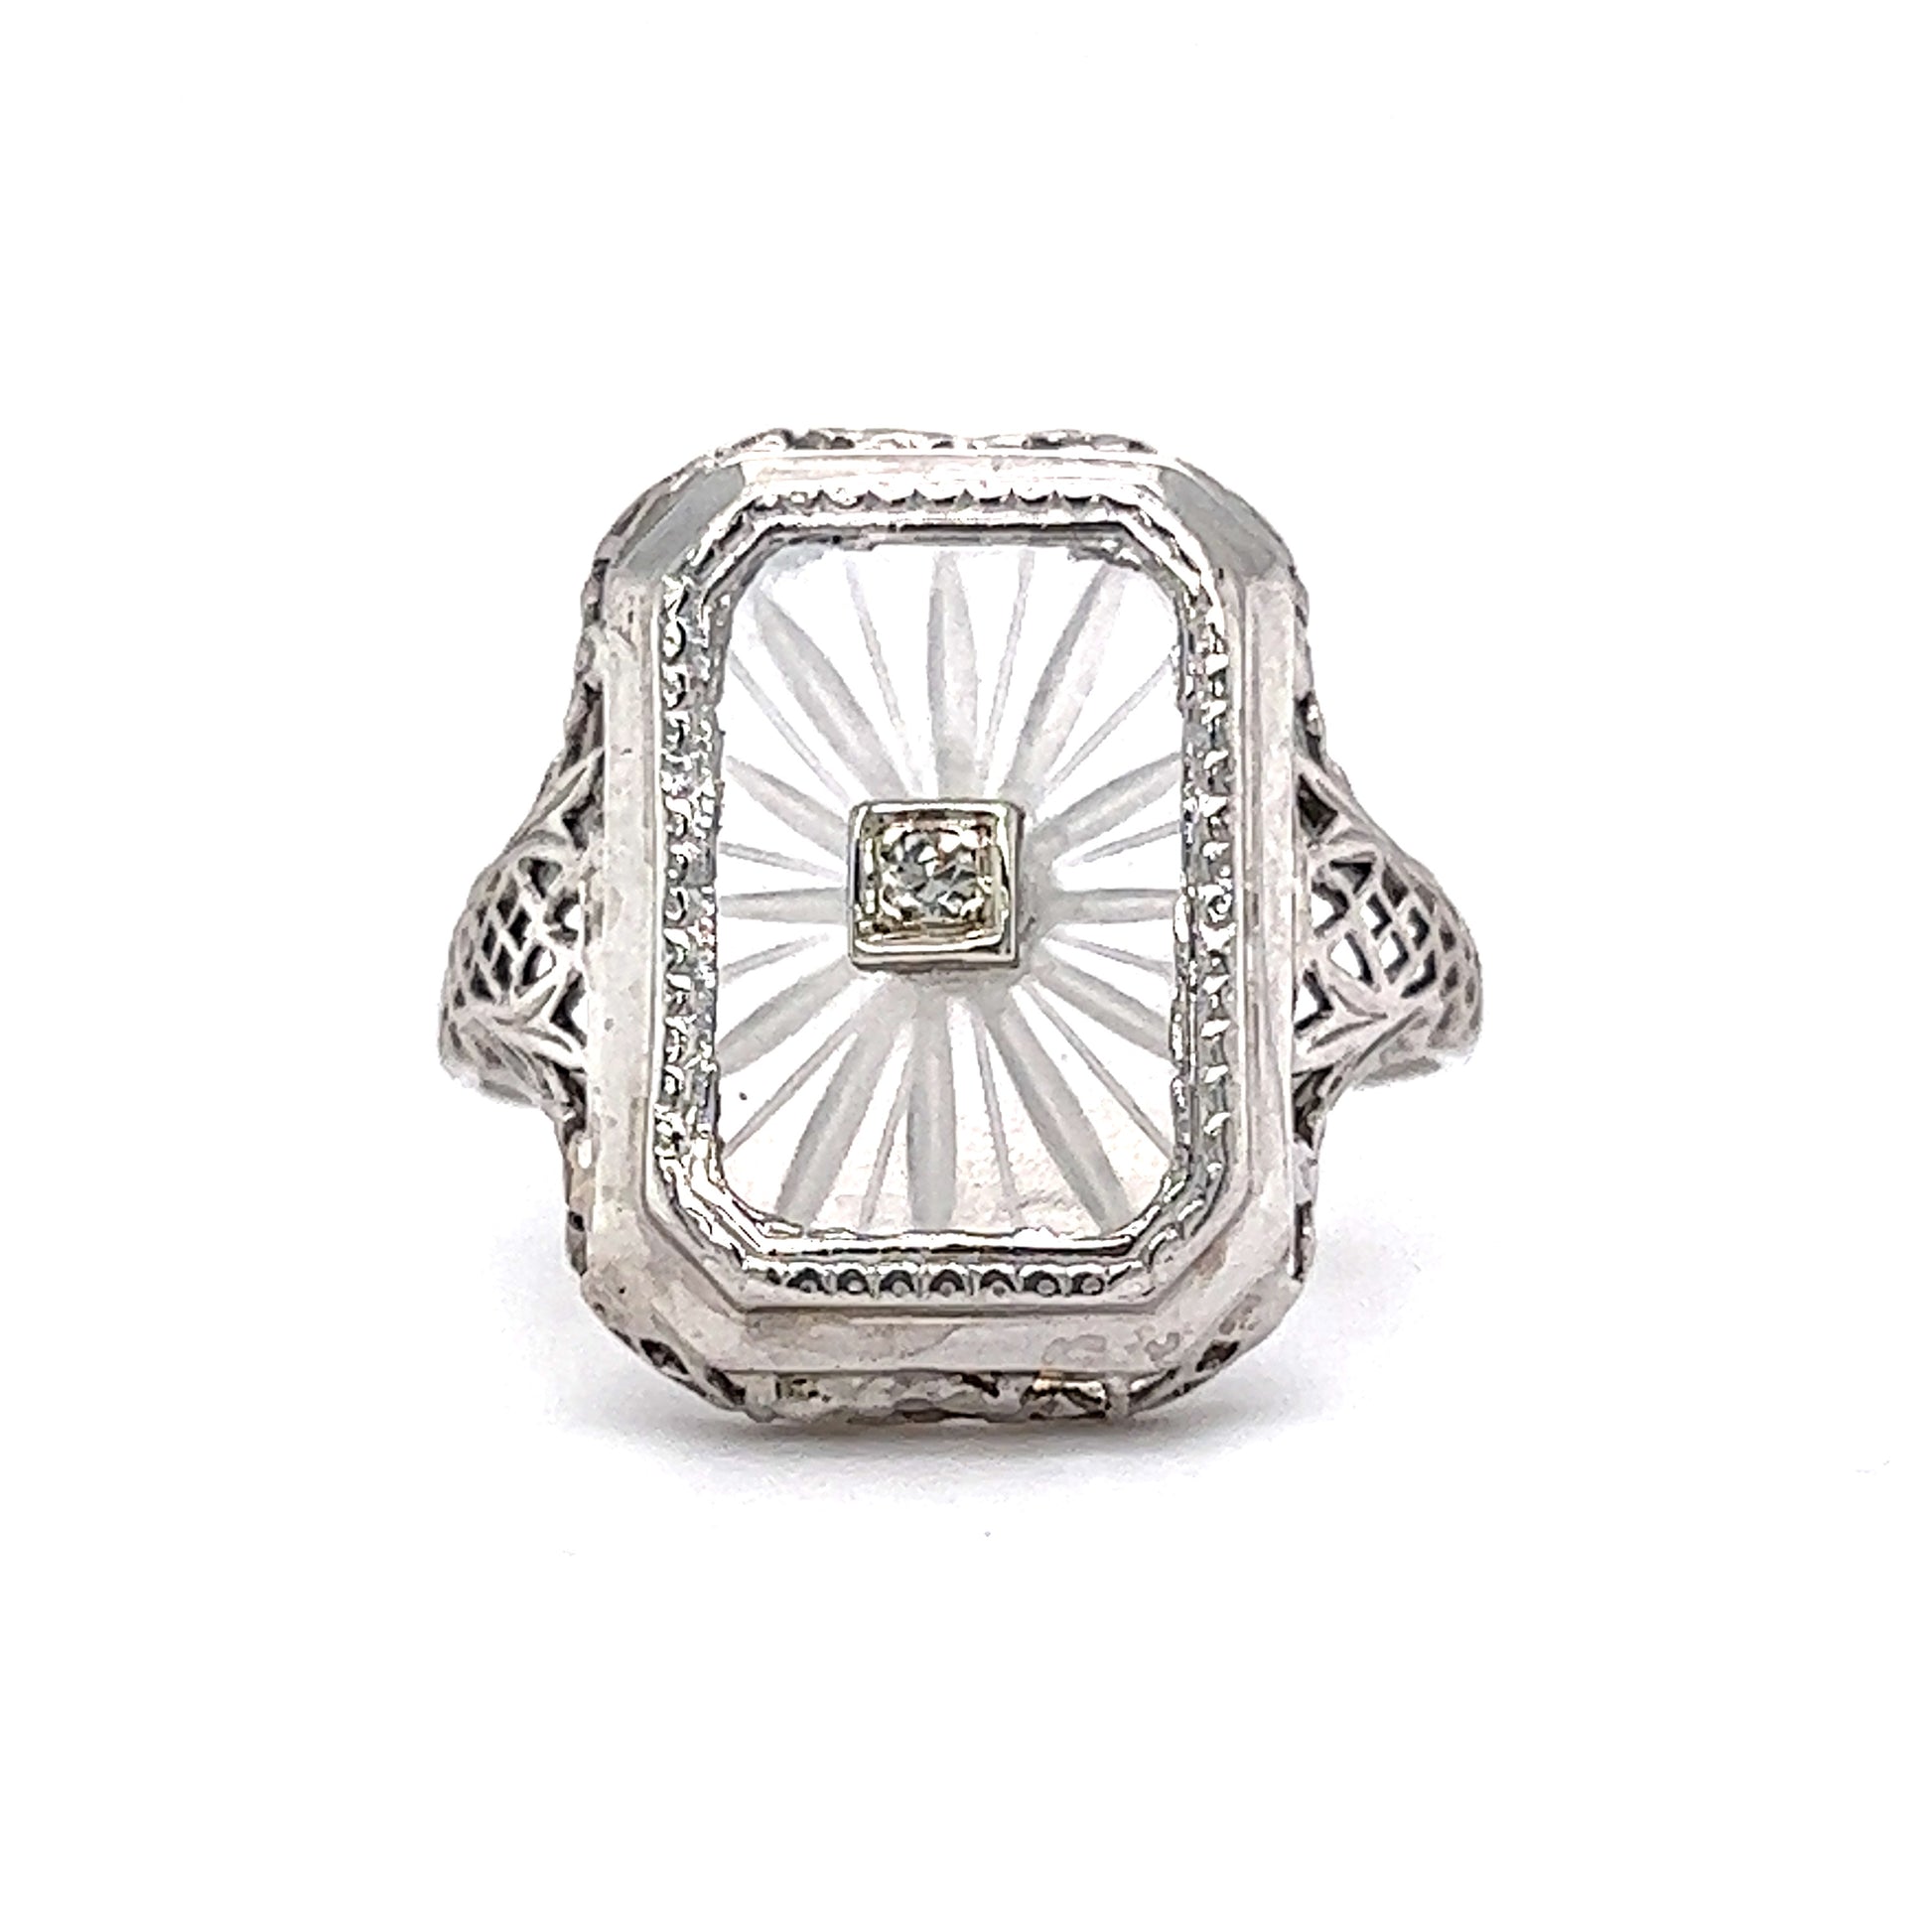 Art Deco Filigree Camphor Cocktail Ring in 14k White GoldComposition: 14 Karat White Gold Ring Size: 6.25 Total Diamond Weight: .02ct Total Gram Weight: 2.5 g Inscription: 14k
      